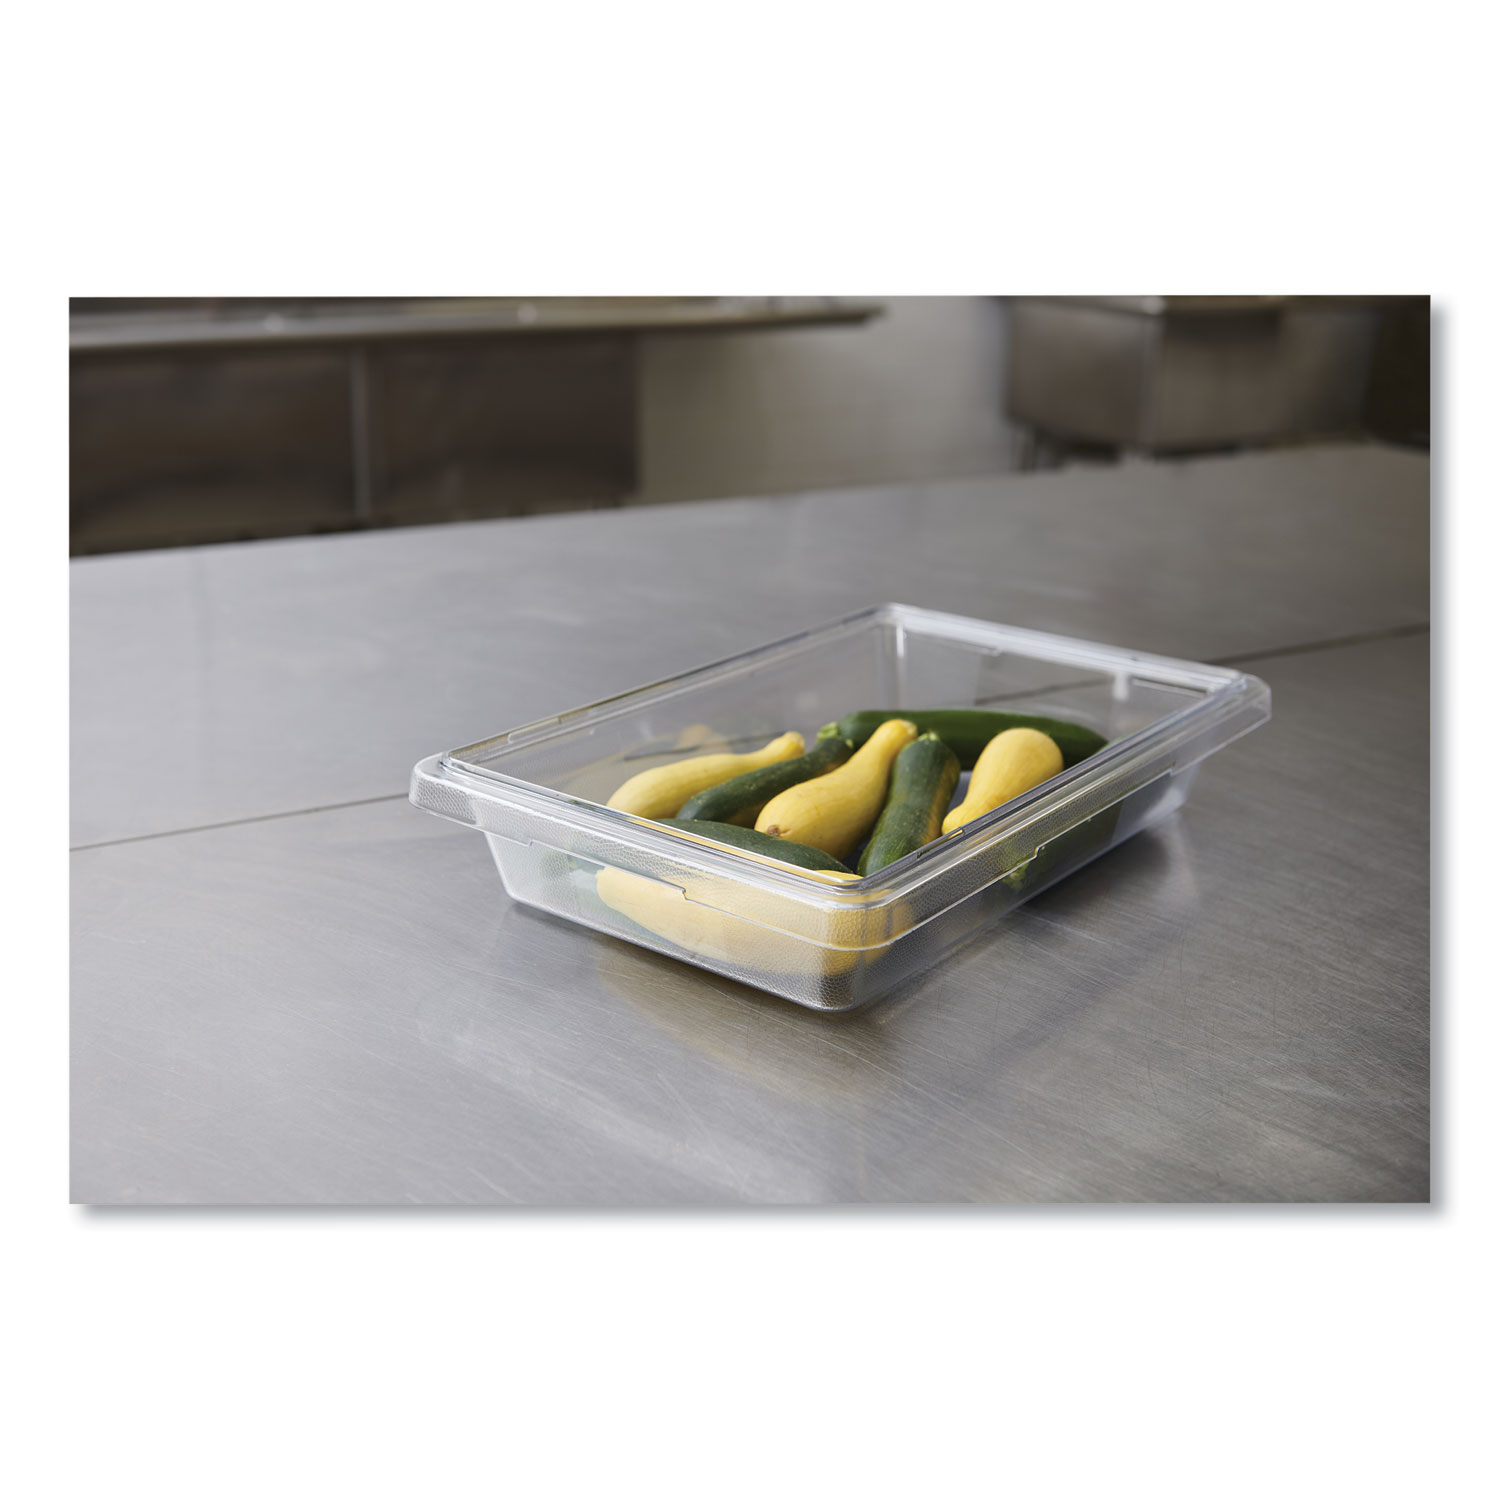 Rubbermaid Dry Food Storage 5 Cup Clear Base – ShopBobbys